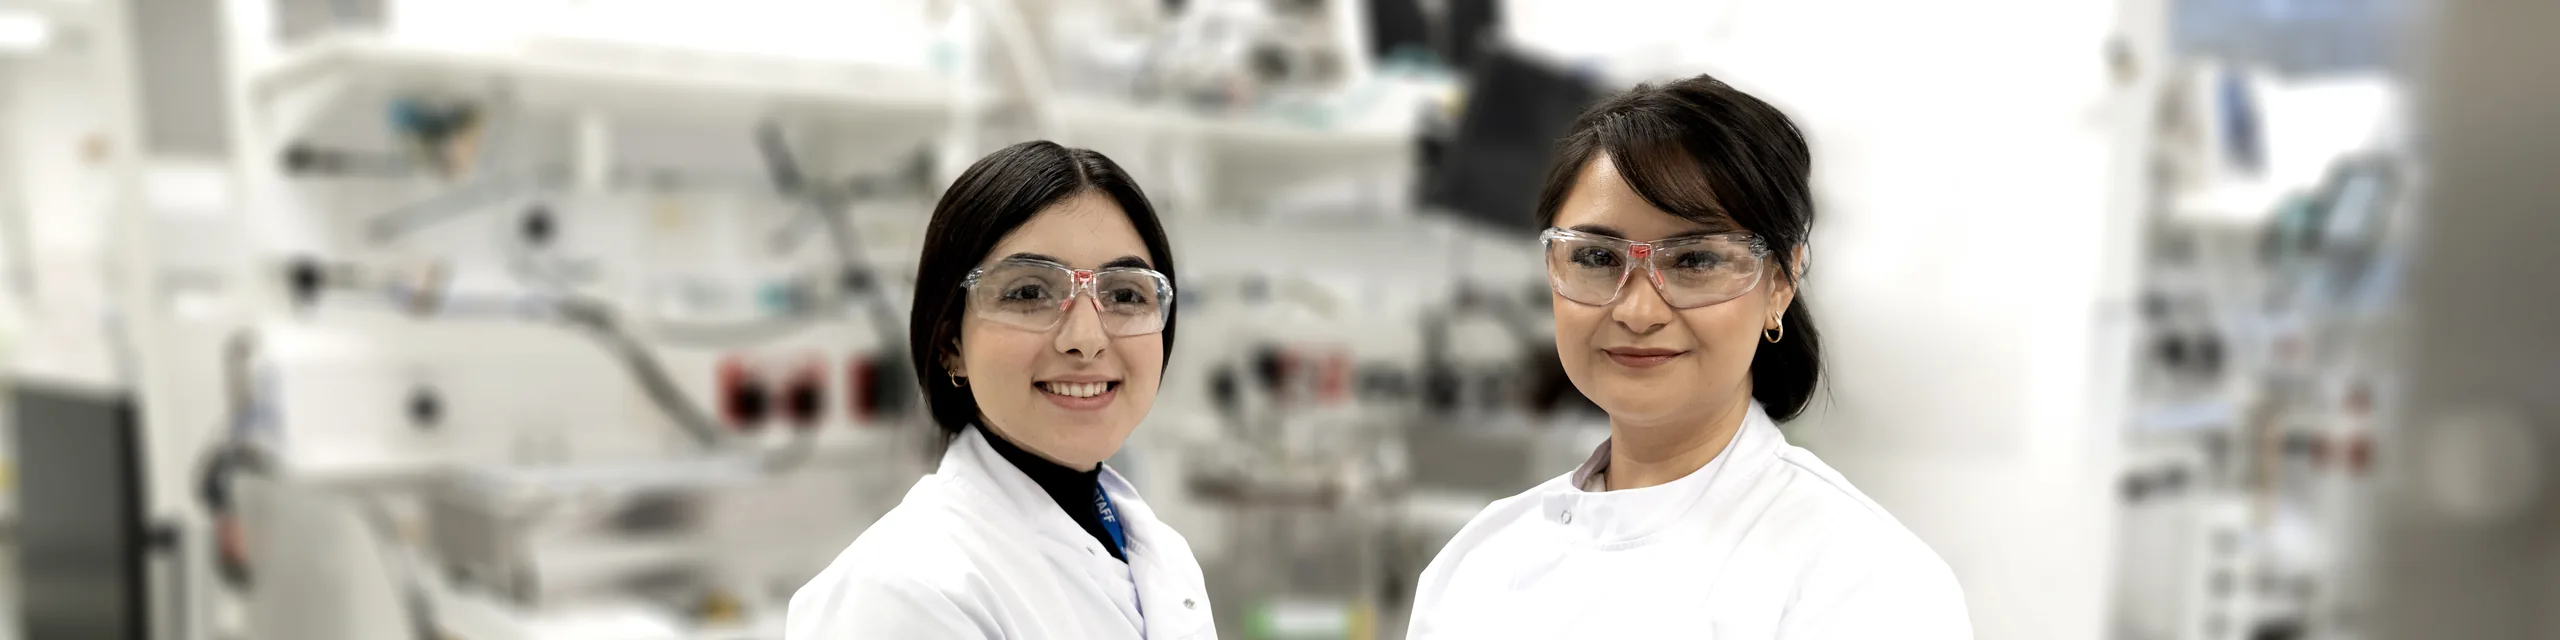 two female lab workers in a sterile lab